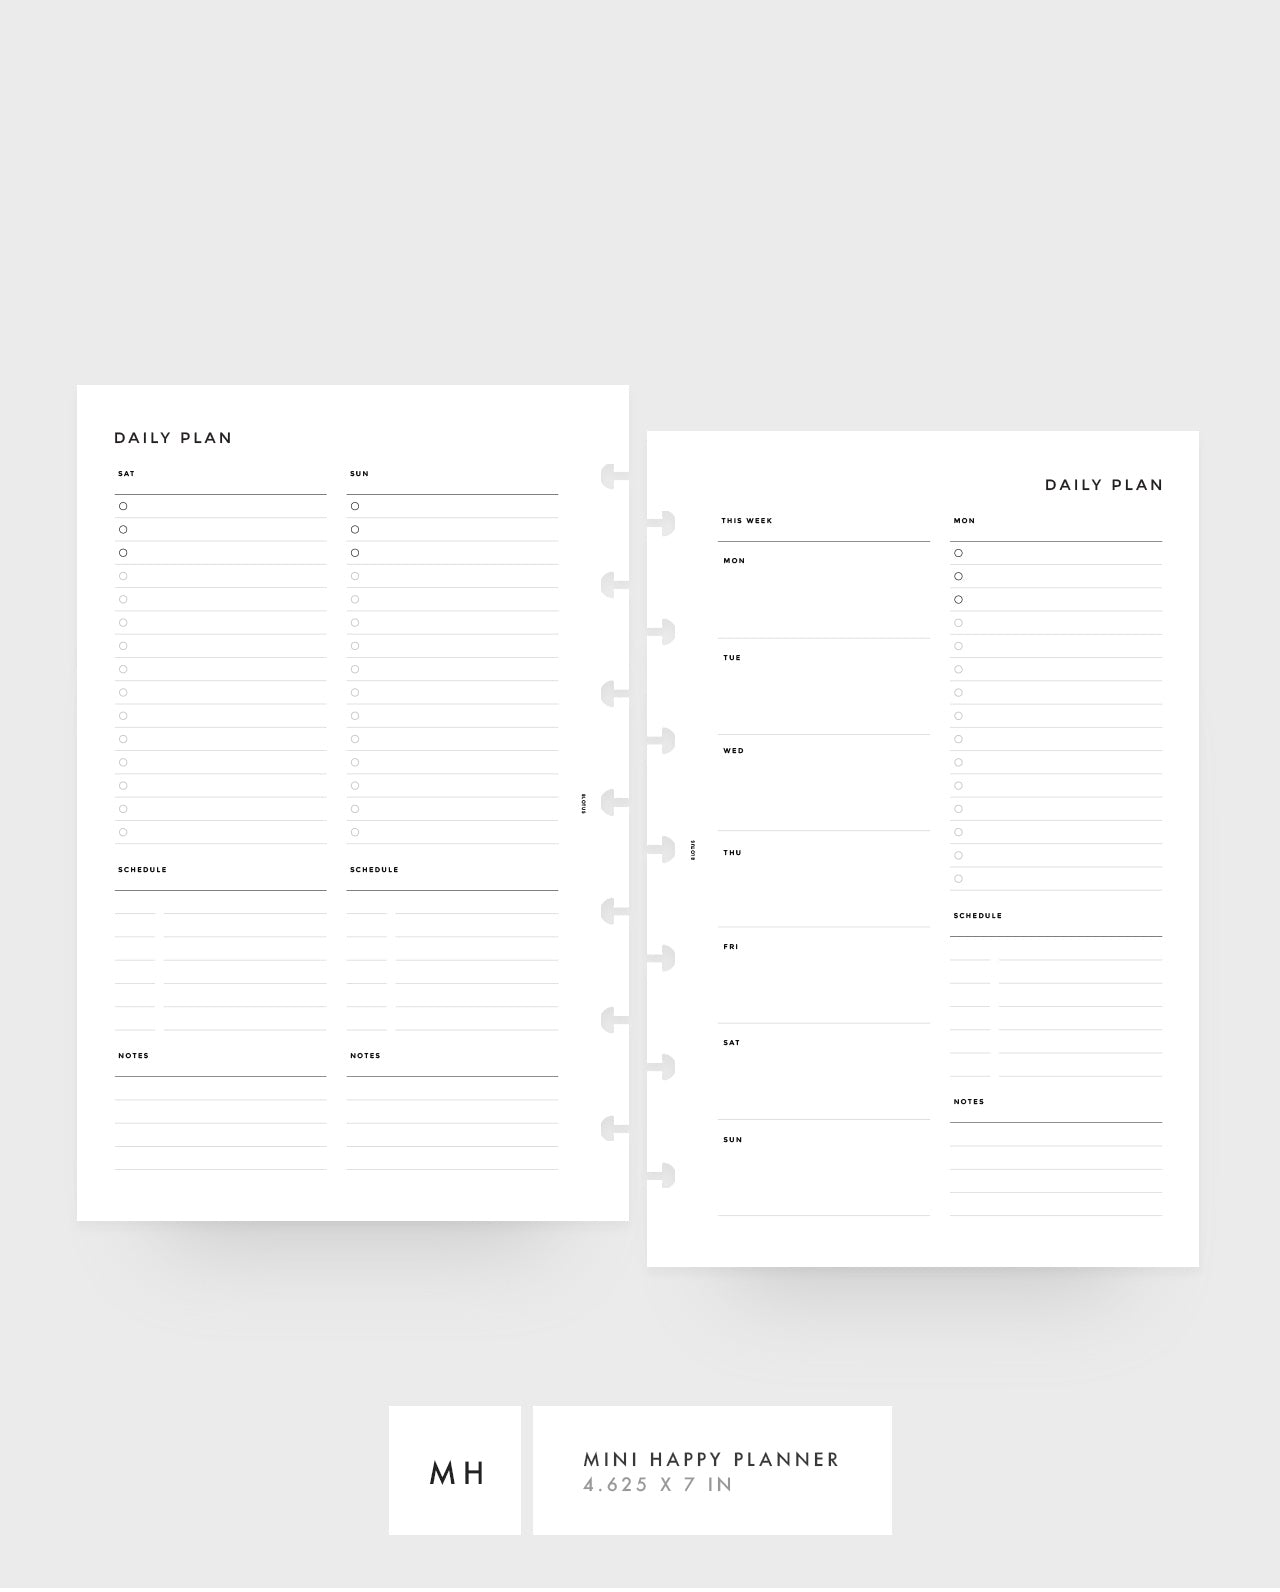 MN080 - Daily Planner - To Do, Schedule, Notes - 2D01P / WO4P